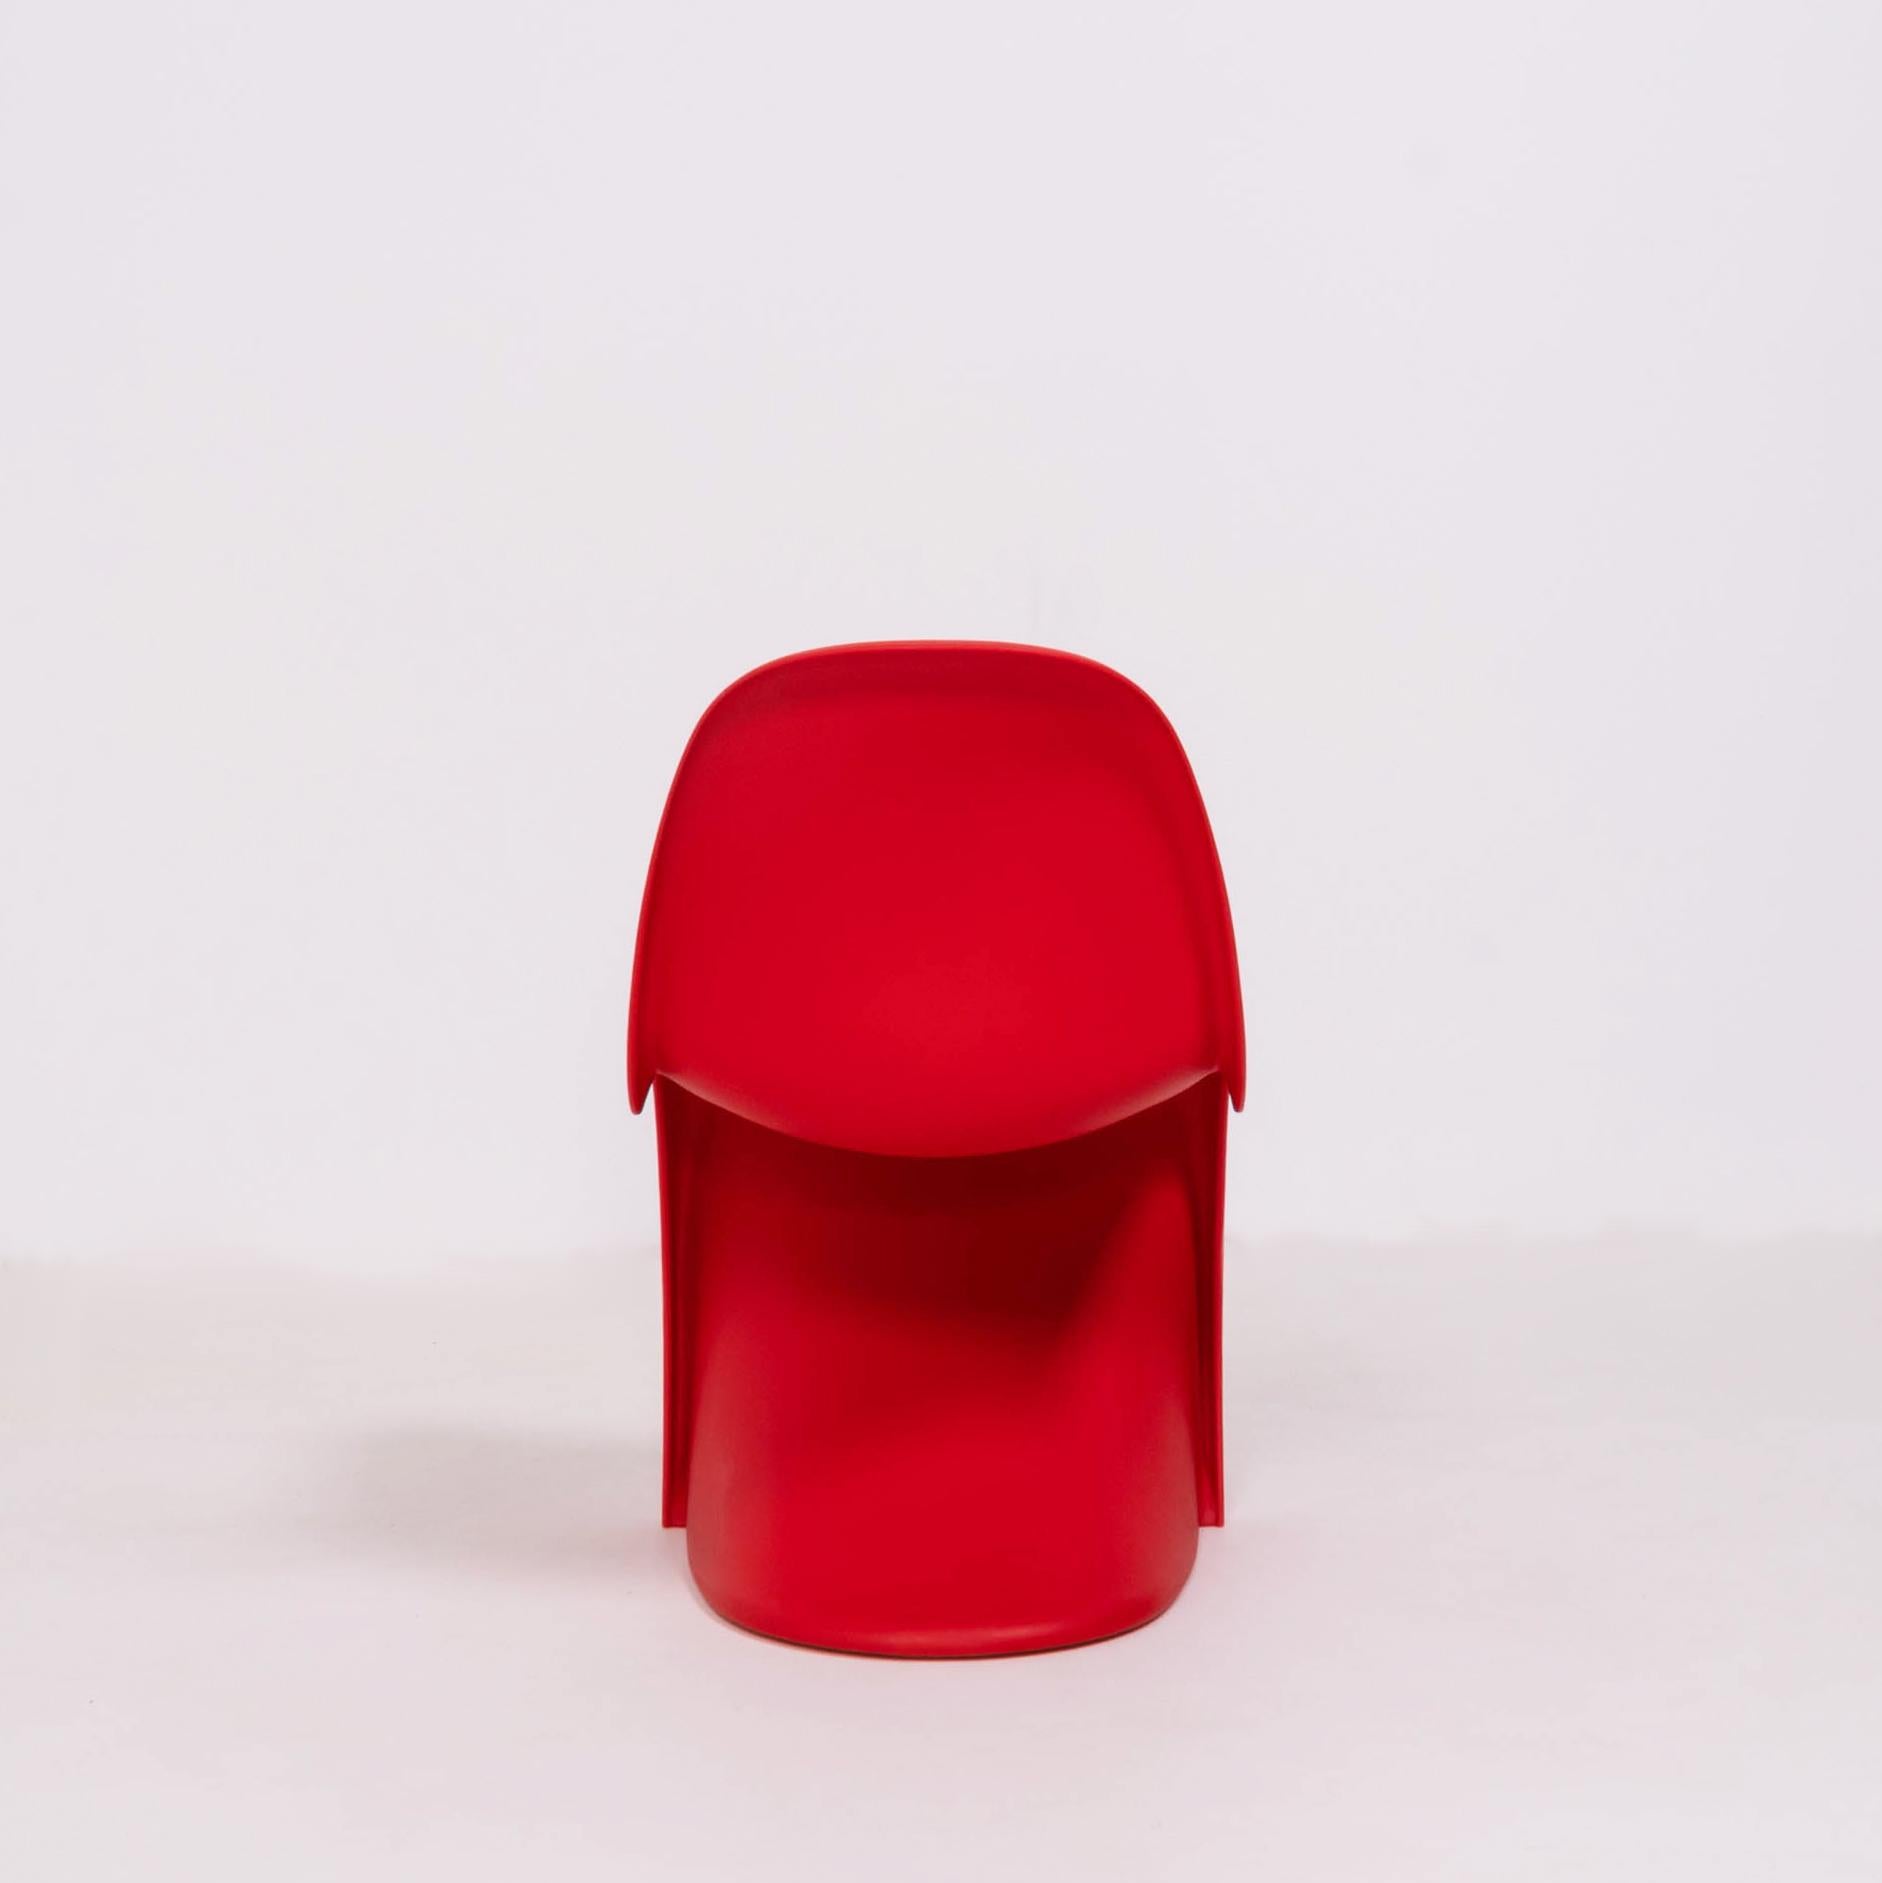 No Box Vitra Panton chair red miniature MOMA New York 1960s MCM Great Condition 